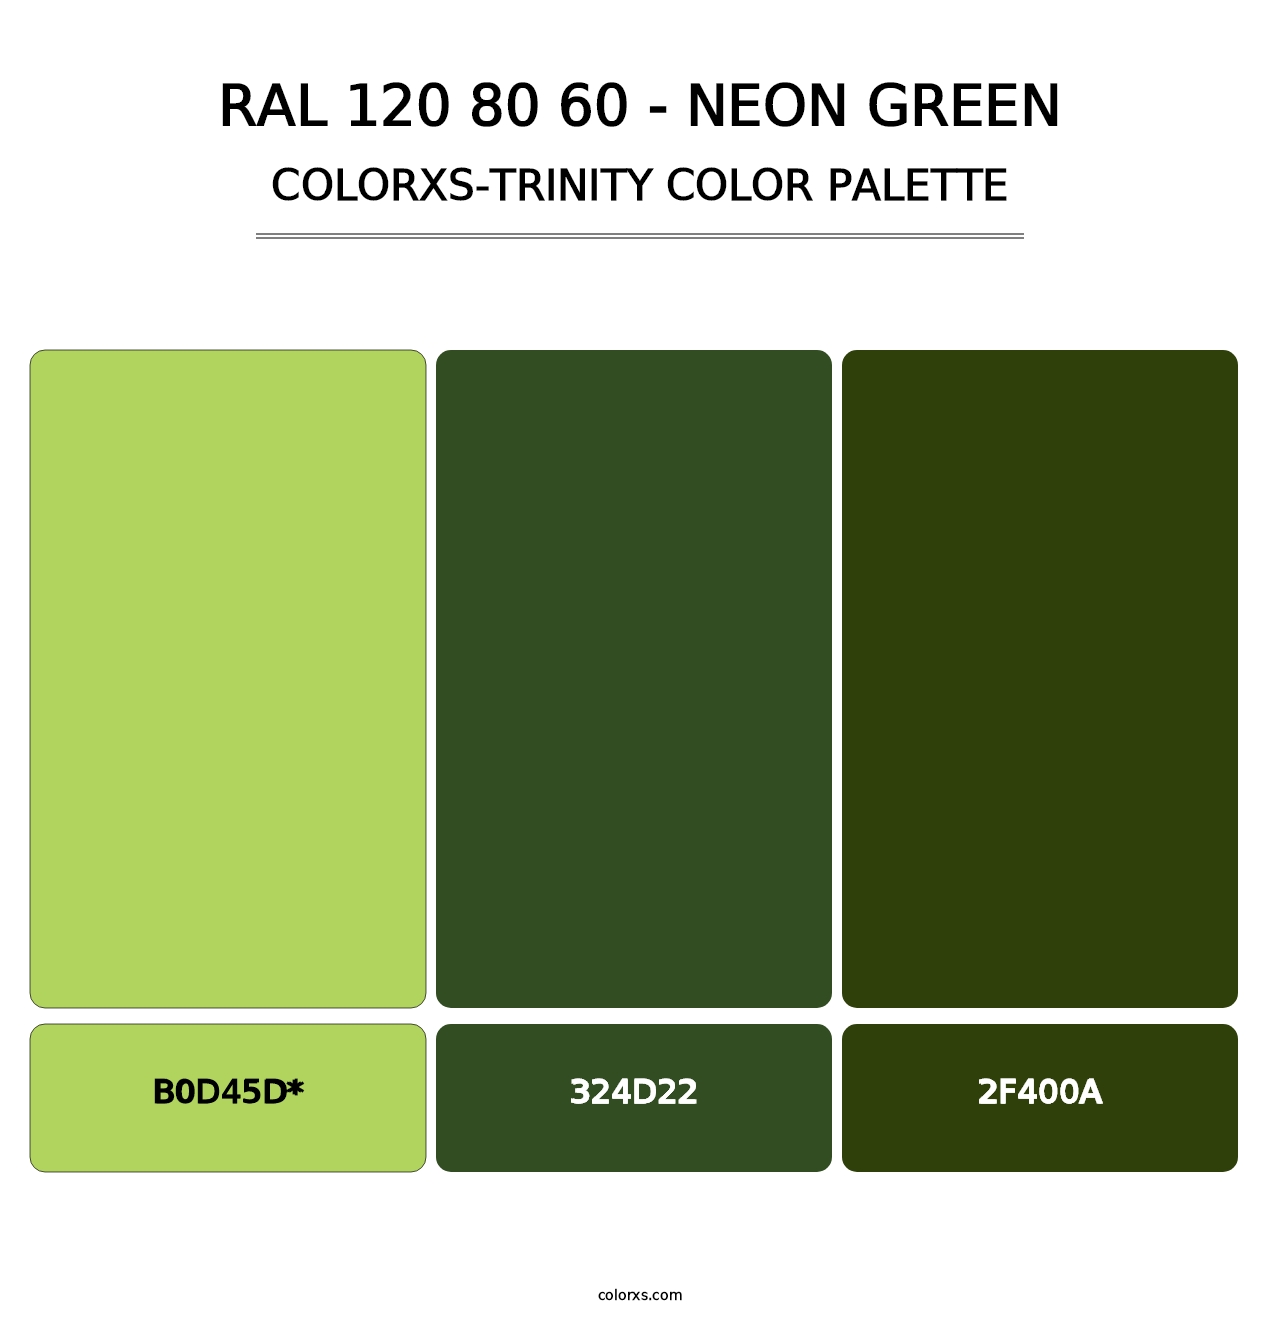 RAL 120 80 60 - Neon Green - Colorxs Trinity Palette